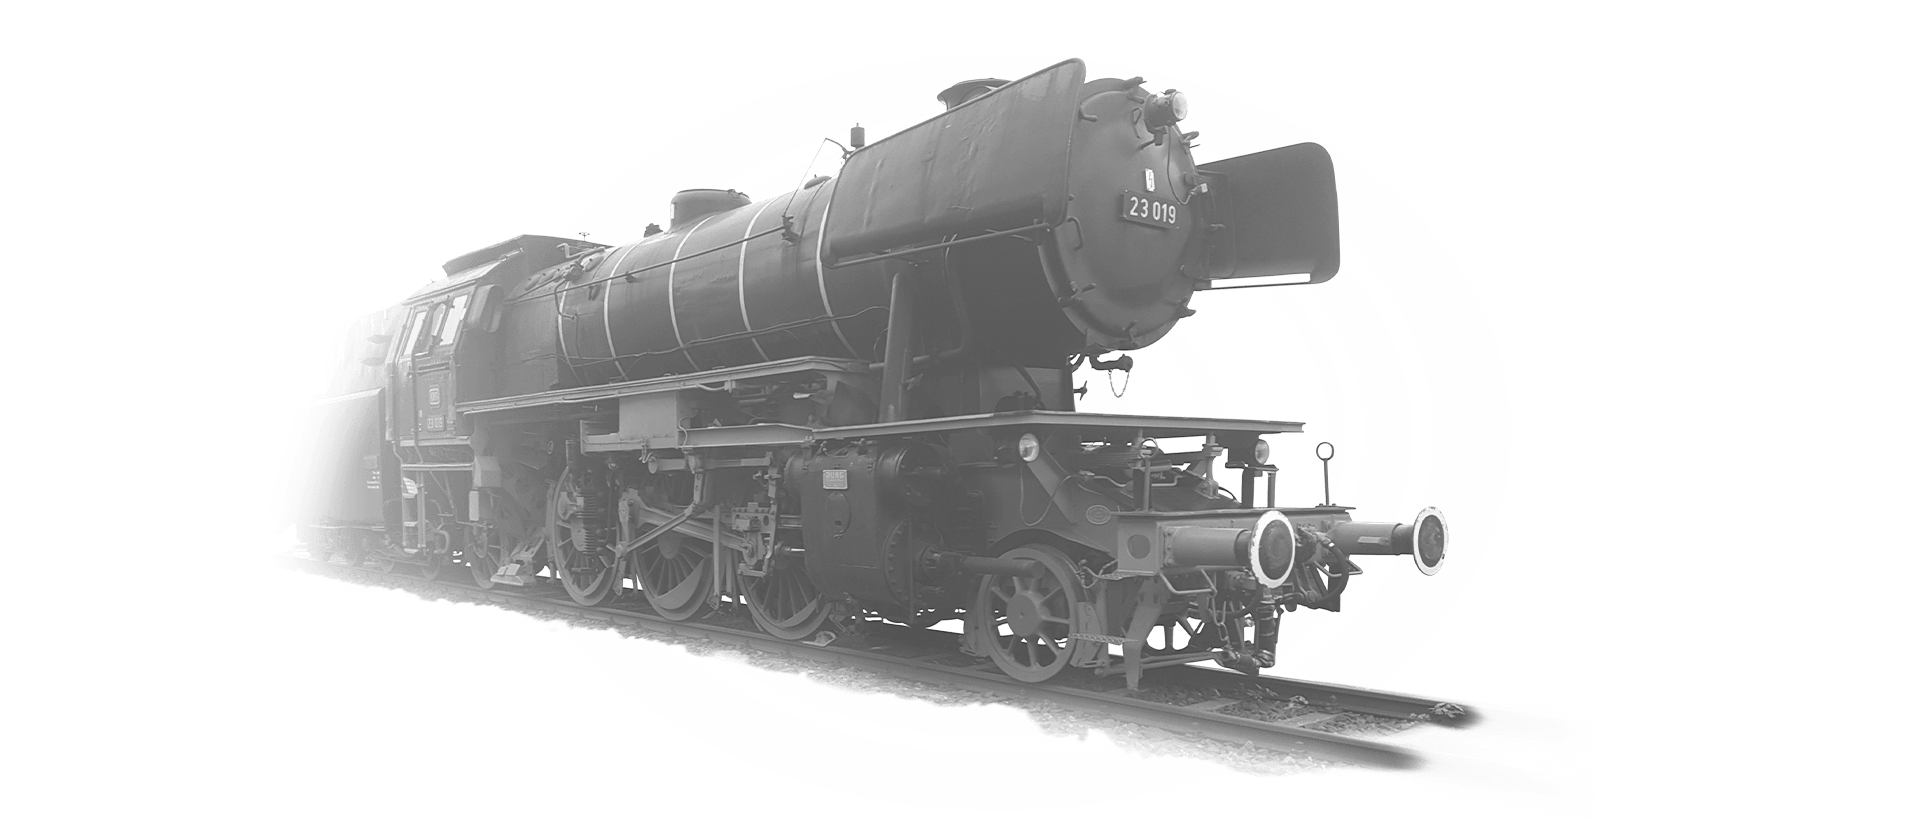 The locomotive 23-109 is going towards the camera in black and white